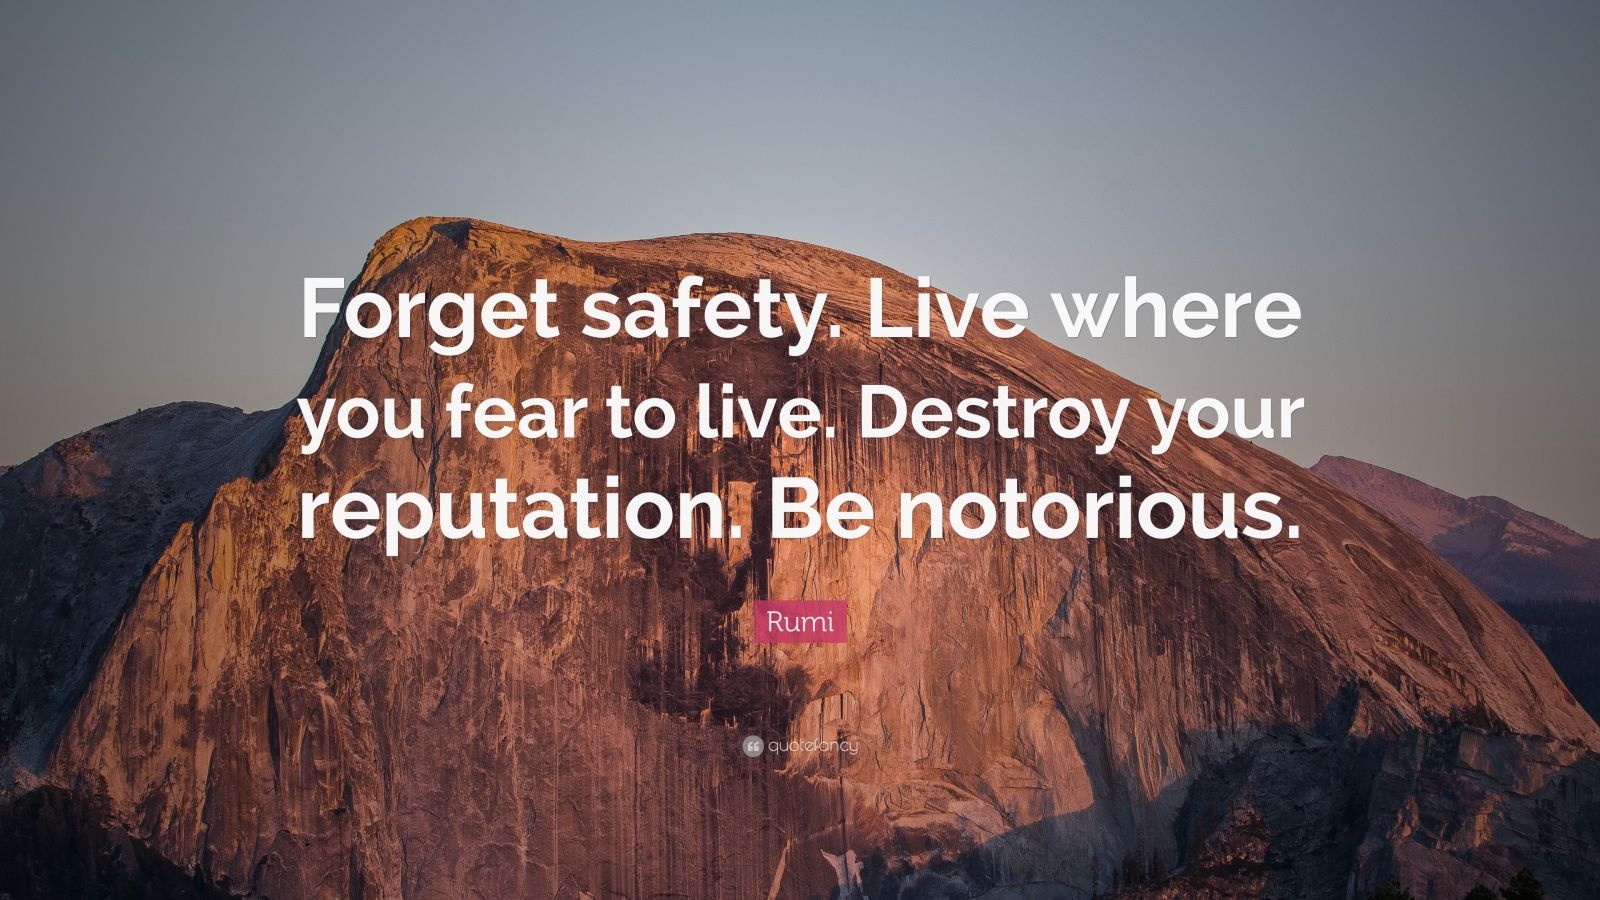 Rumi Quote: “Forget safety. Live where you fear to live. Destroy your